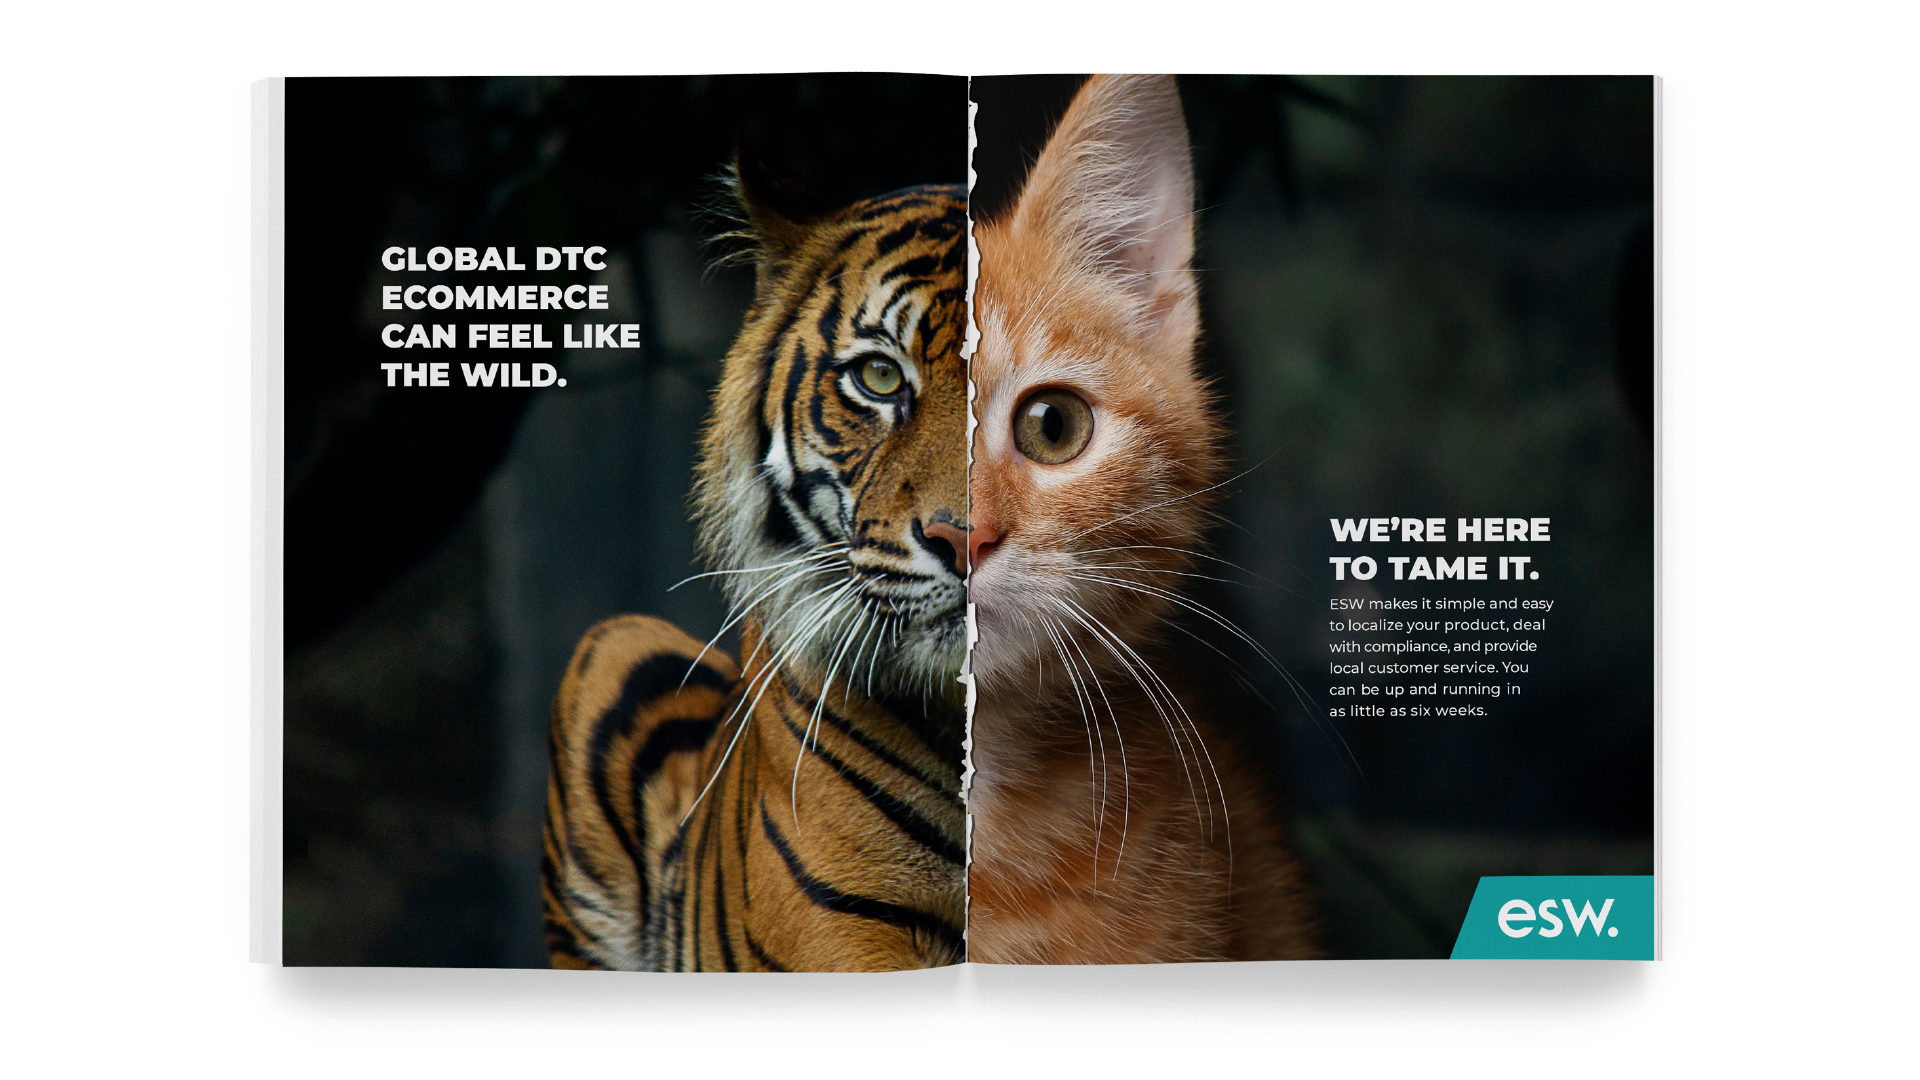 The image of the tiger is accompanied with the words, “Global DTC ecommerce can feel like the wild.” That image is split down the middle with an orange house kitten on the other side with the text, “We’re here to tame it.”